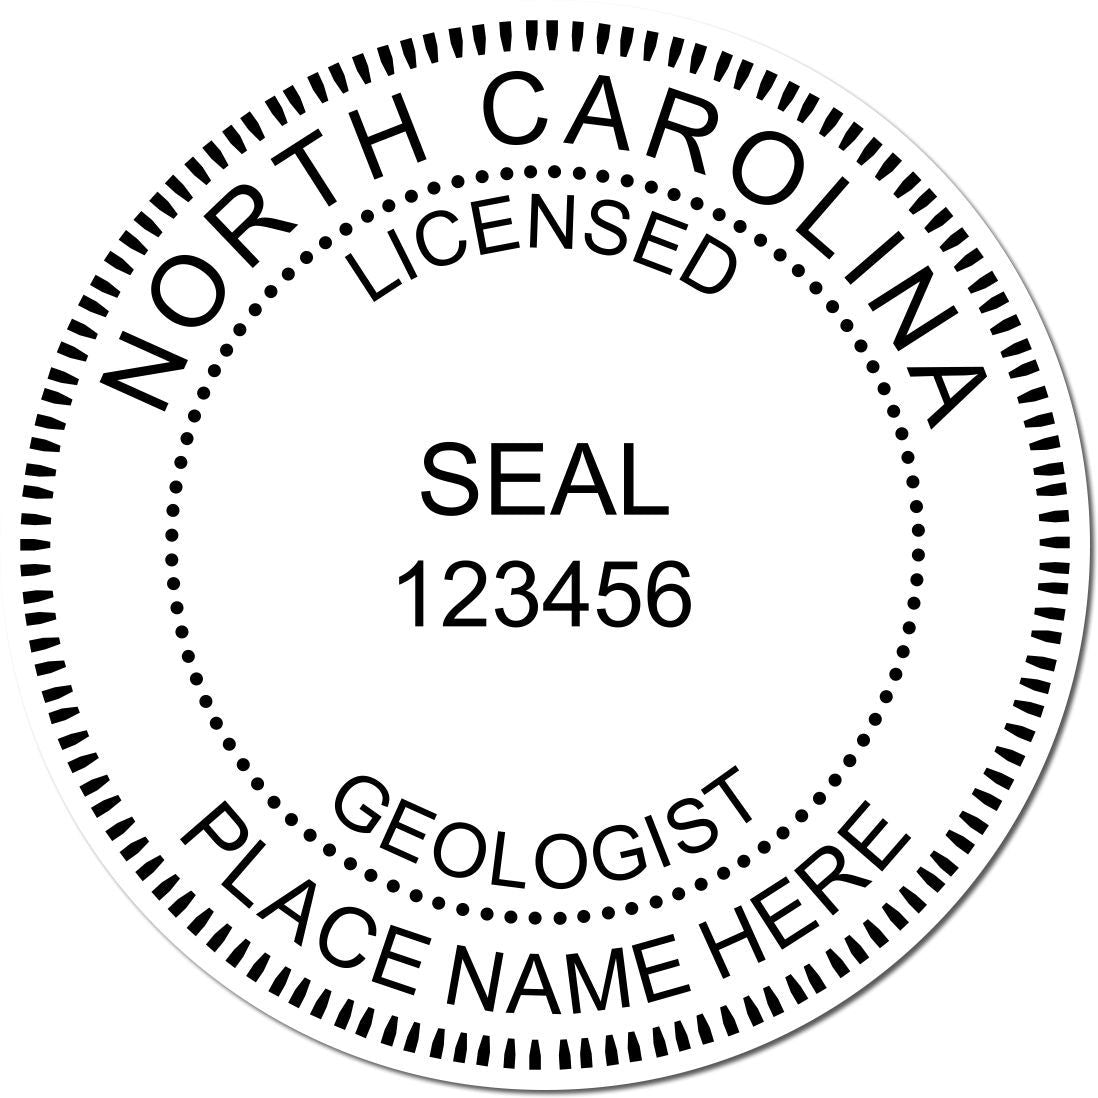 This paper is stamped with a sample imprint of the North Carolina Professional Geologist Seal Stamp, signifying its quality and reliability.